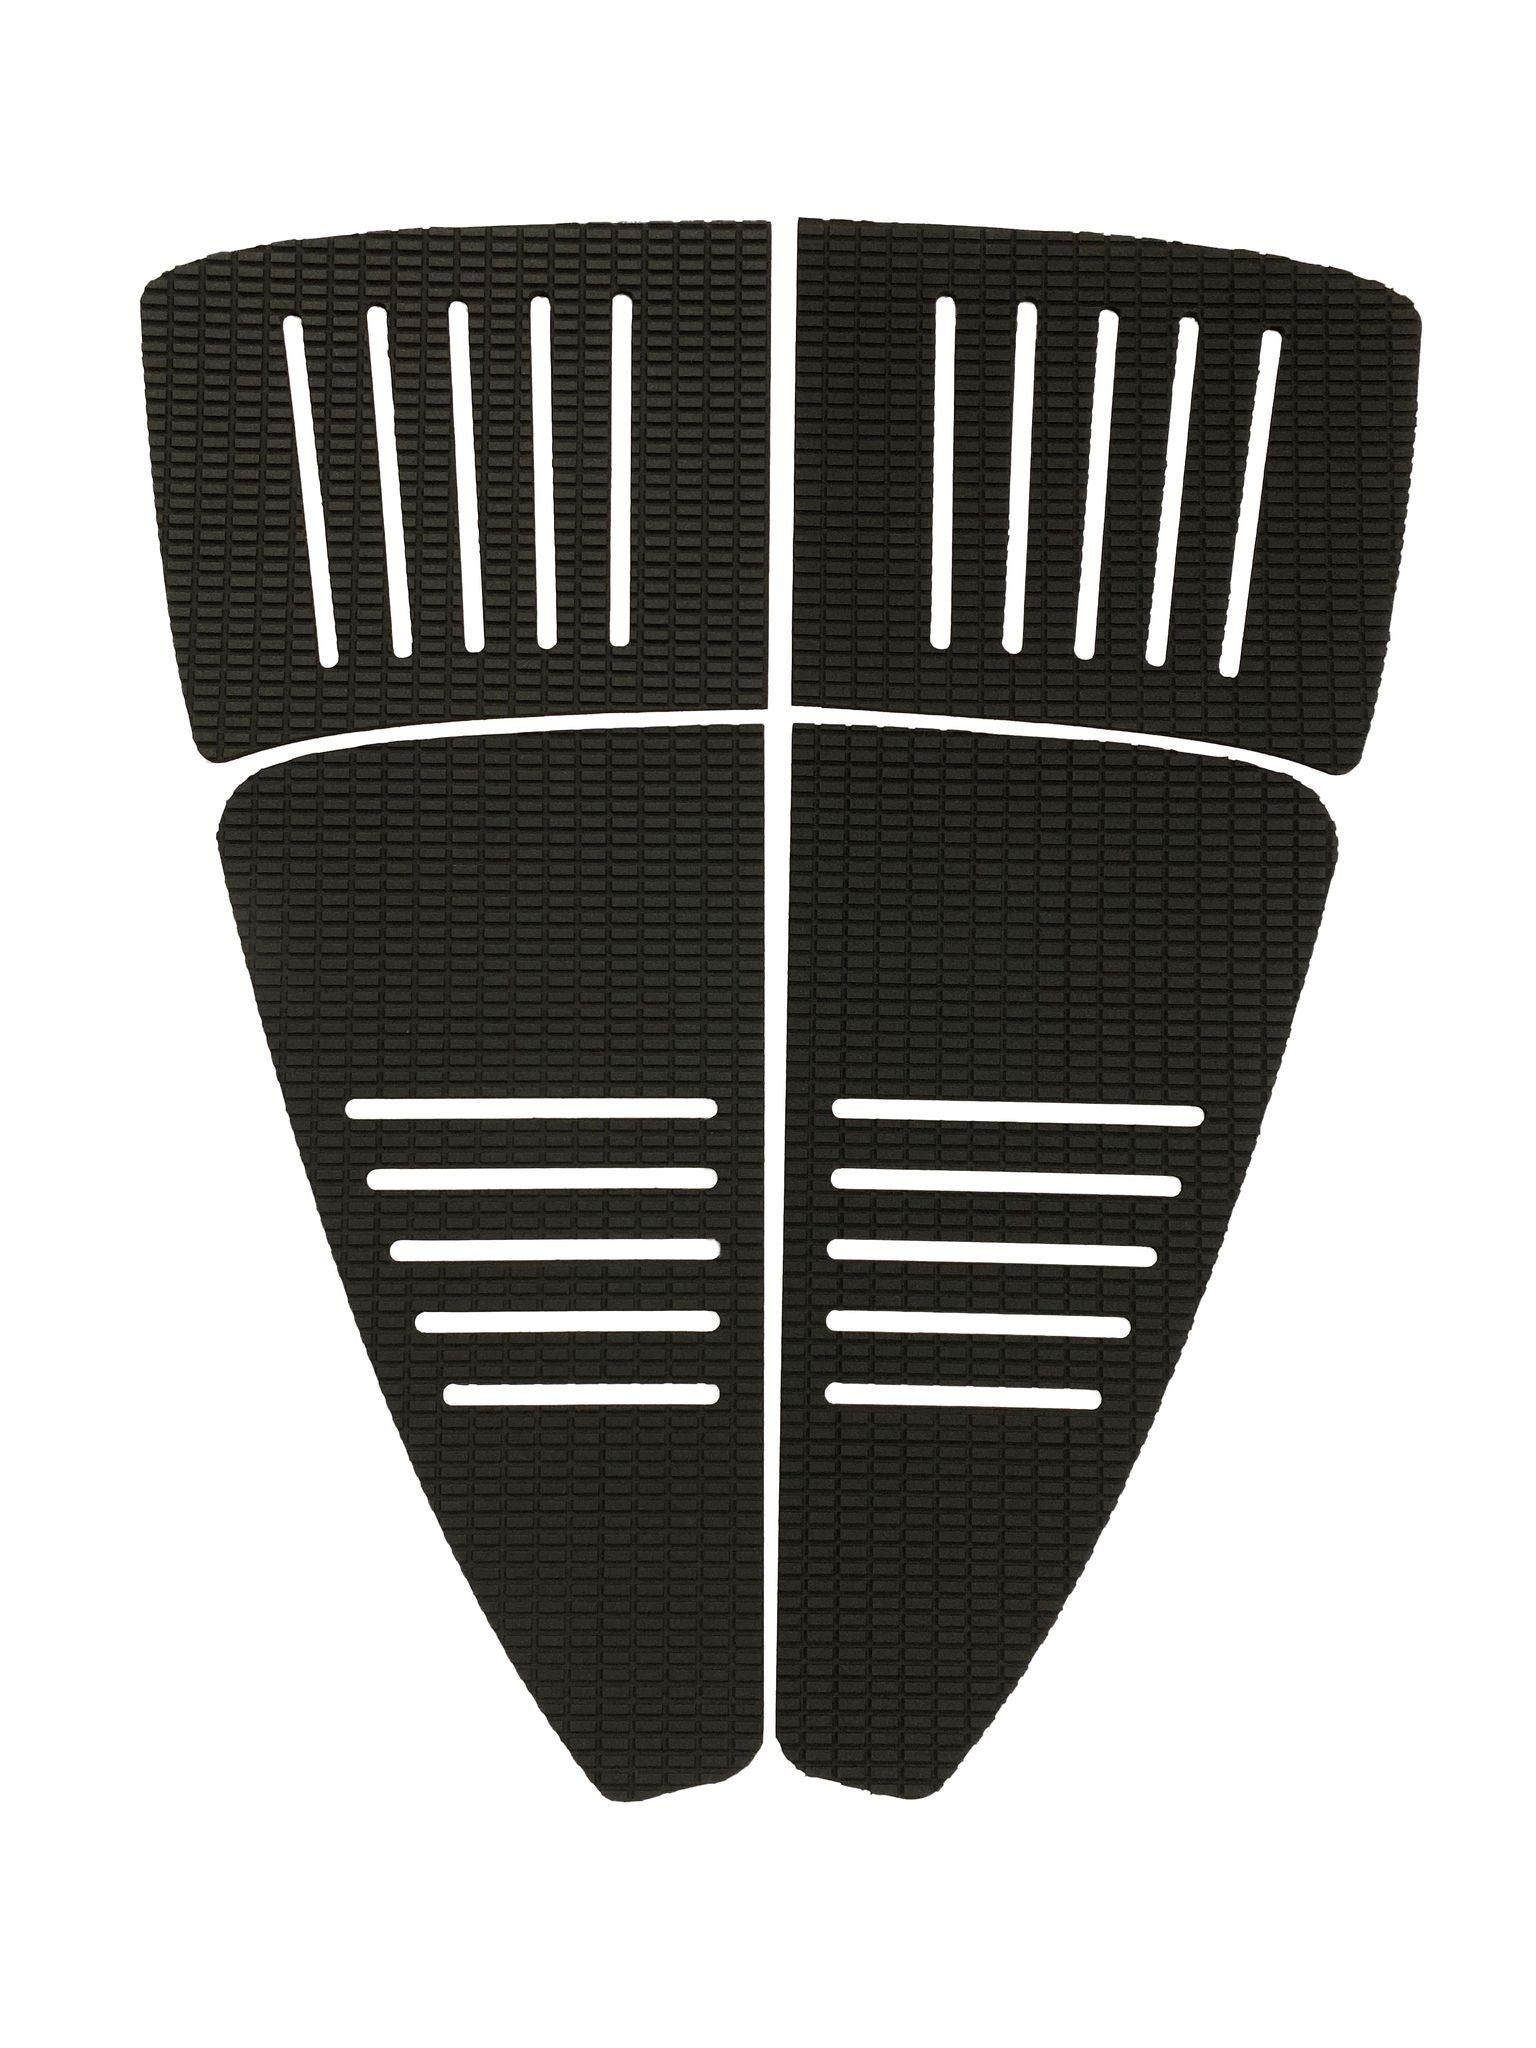 Weekend Traction Pad – Firewire - USA